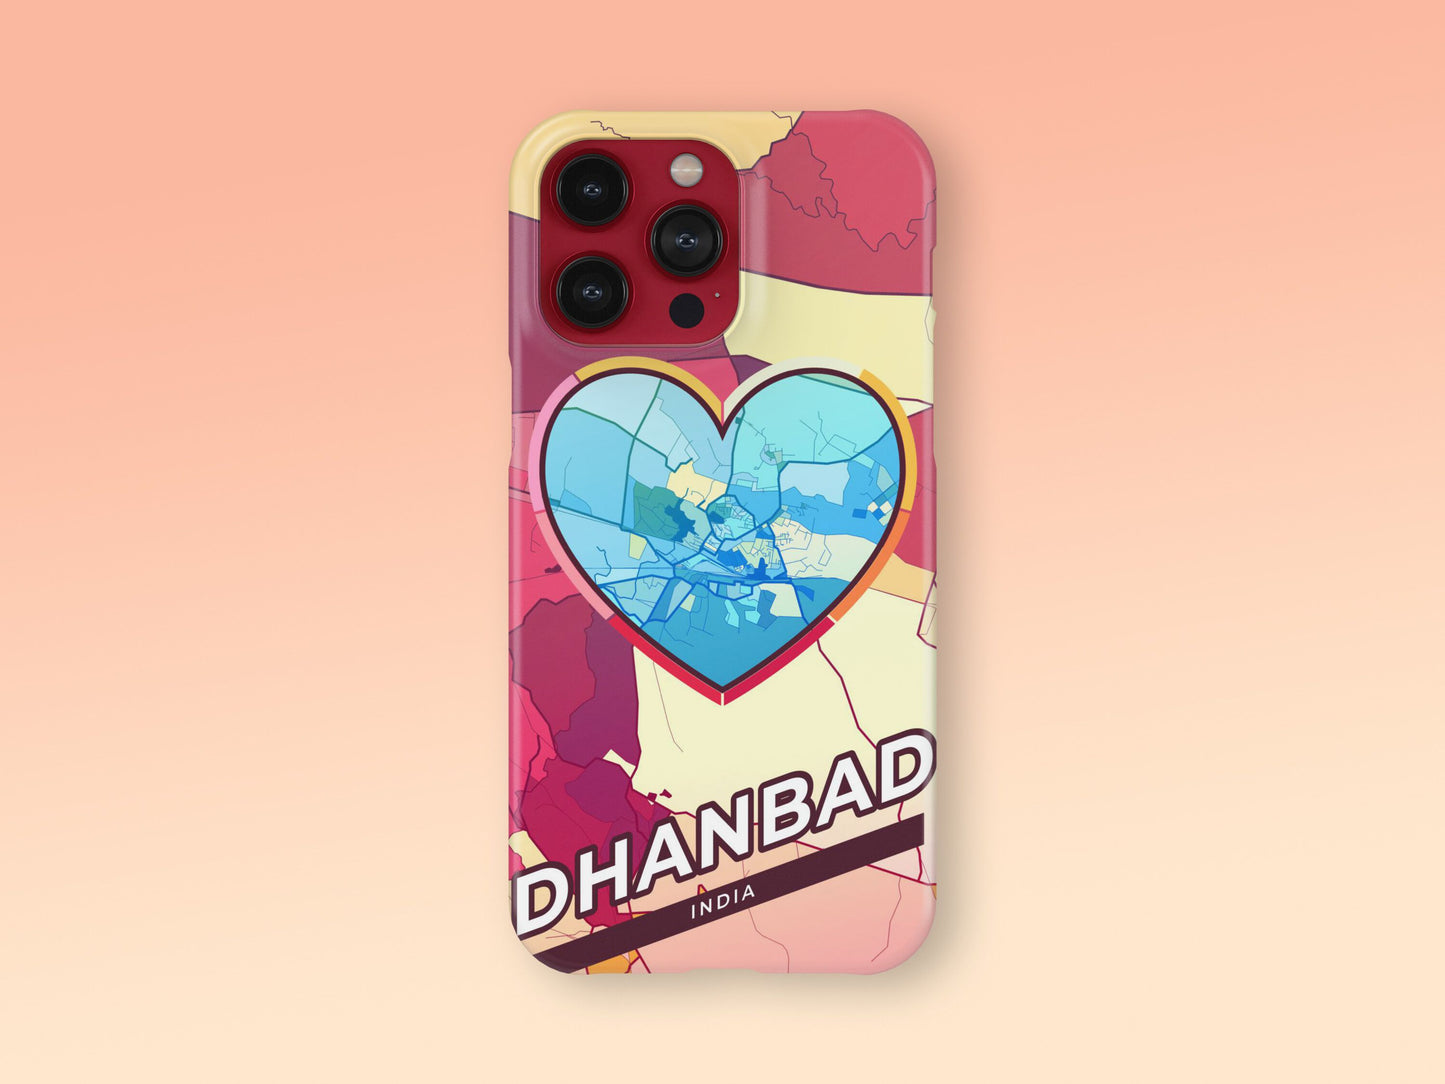 Dhanbad India slim phone case with colorful icon. Birthday, wedding or housewarming gift. Couple match cases. 2